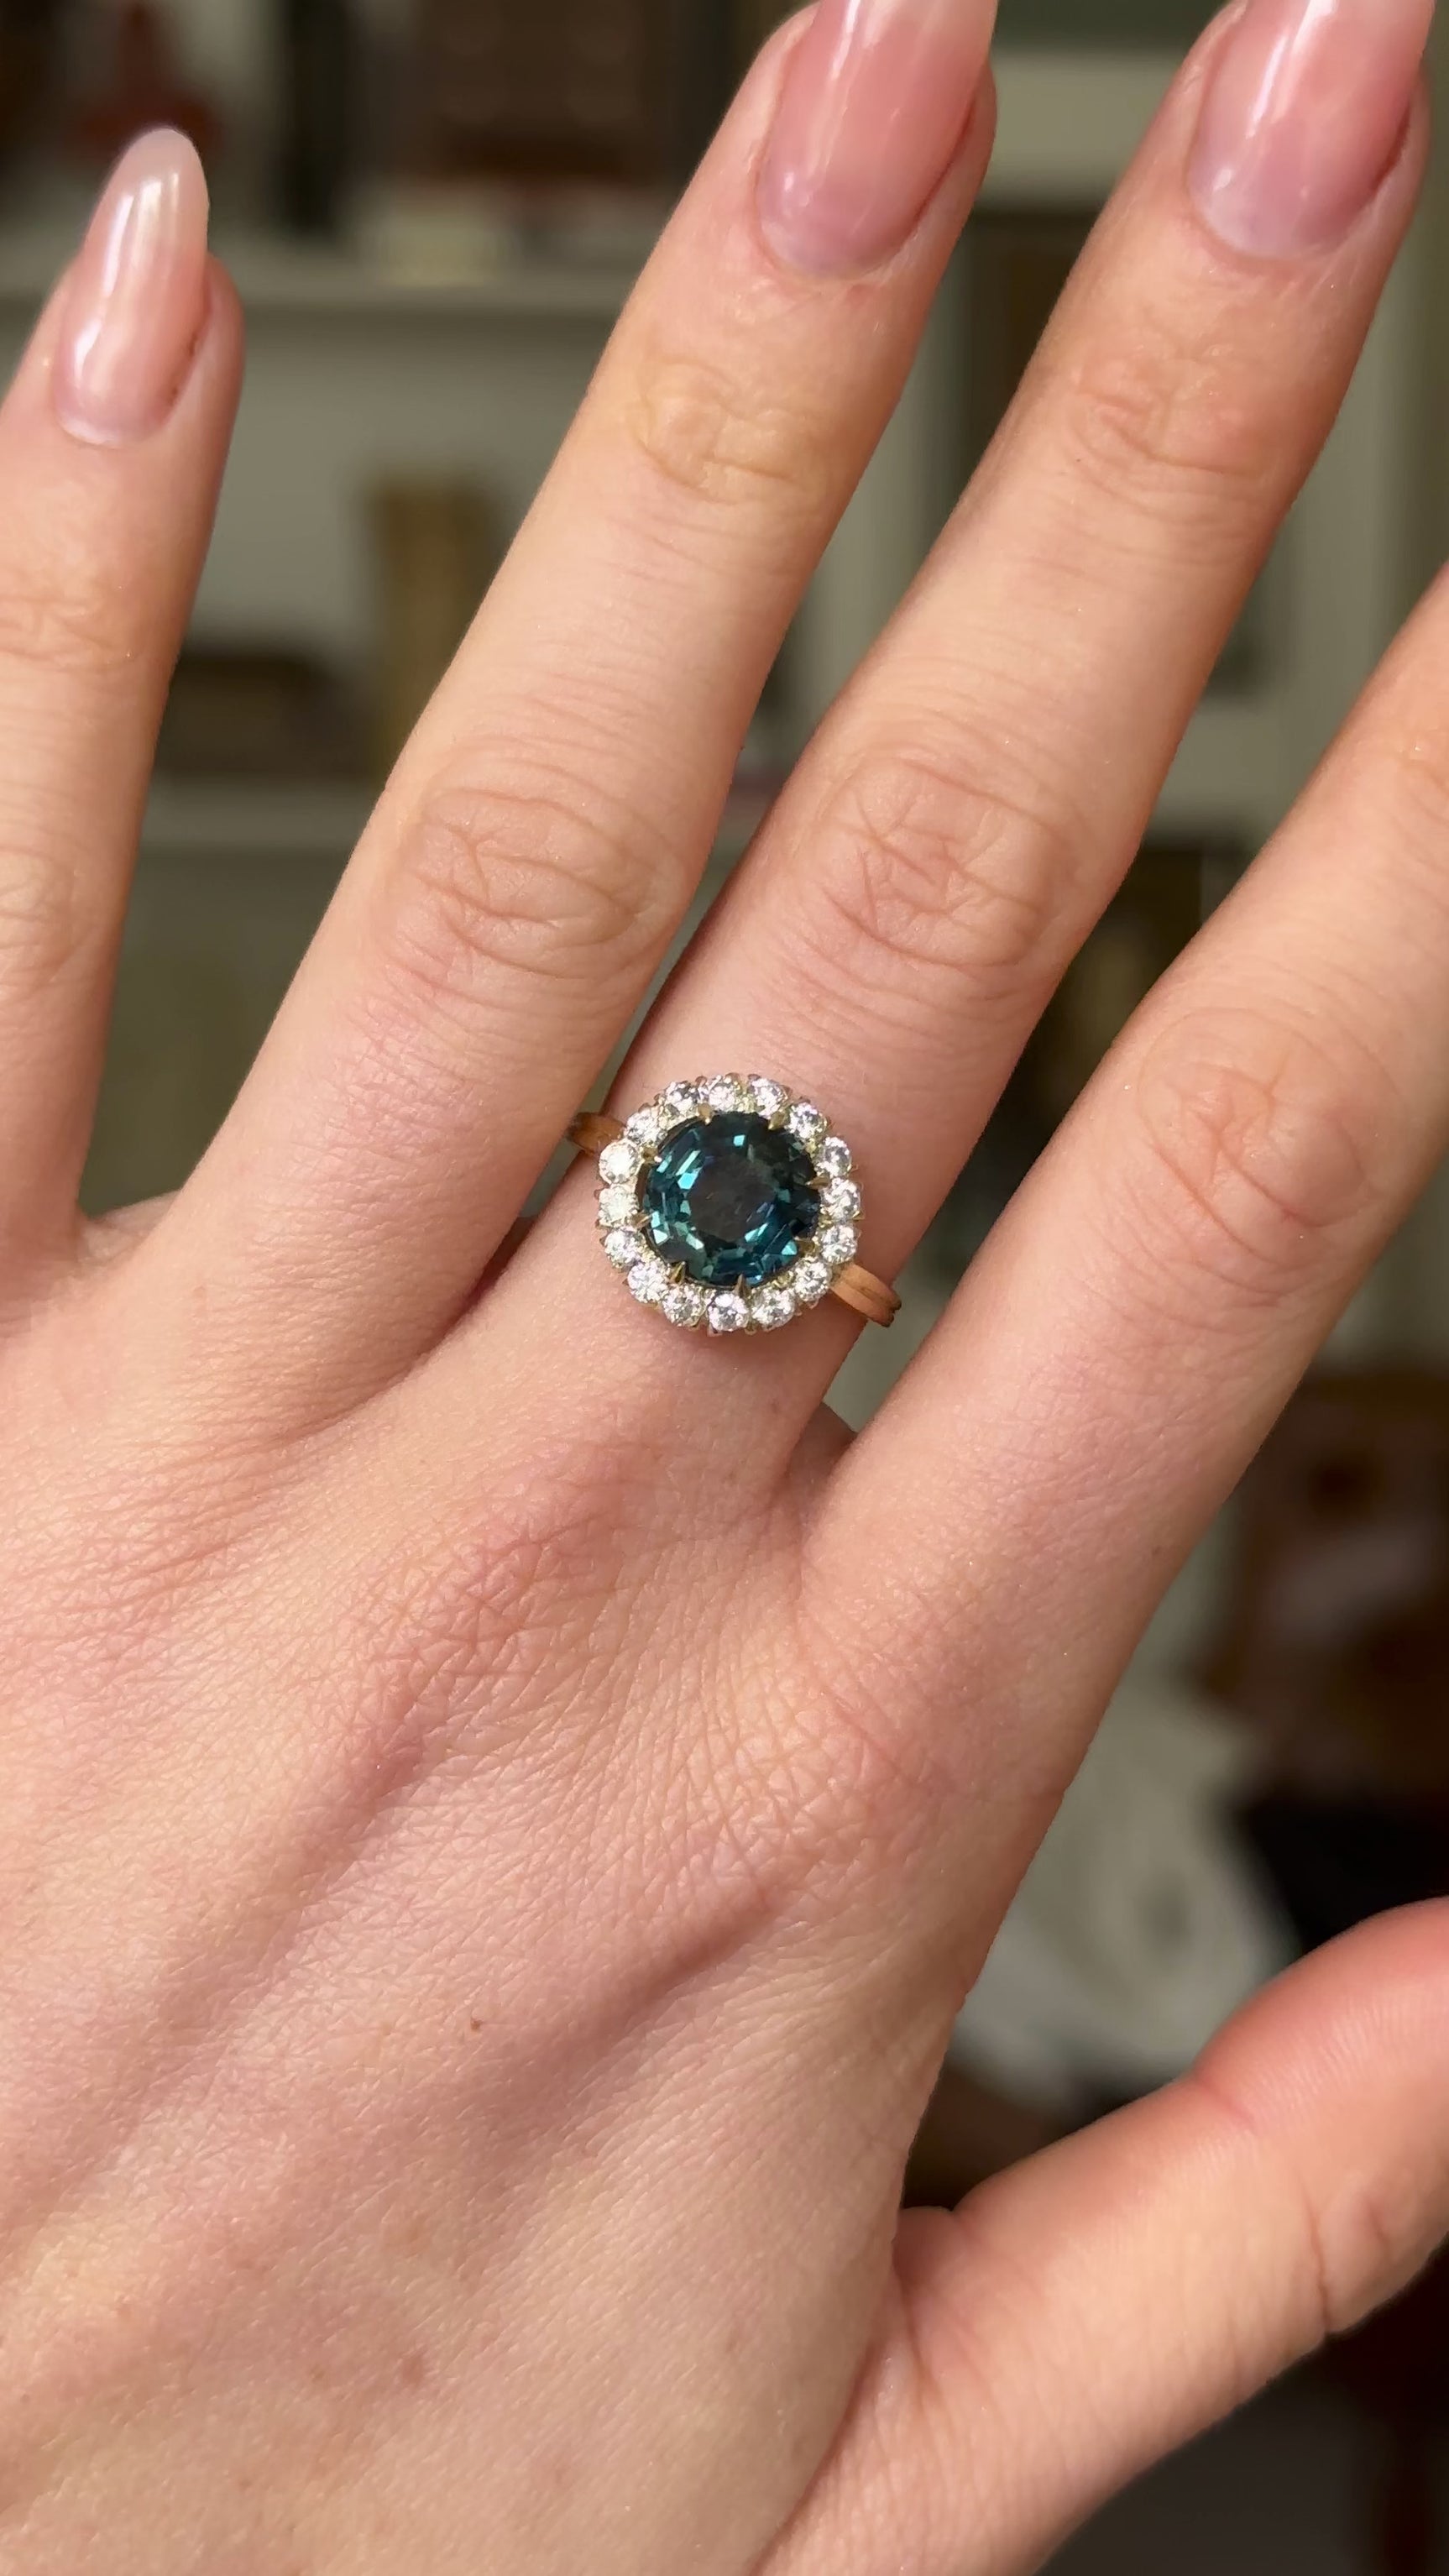 Antique, Teal Blue Sapphire and Diamond Cluster Ring, 18ct Yellow Gold worn on hand and rotated to give perspective.